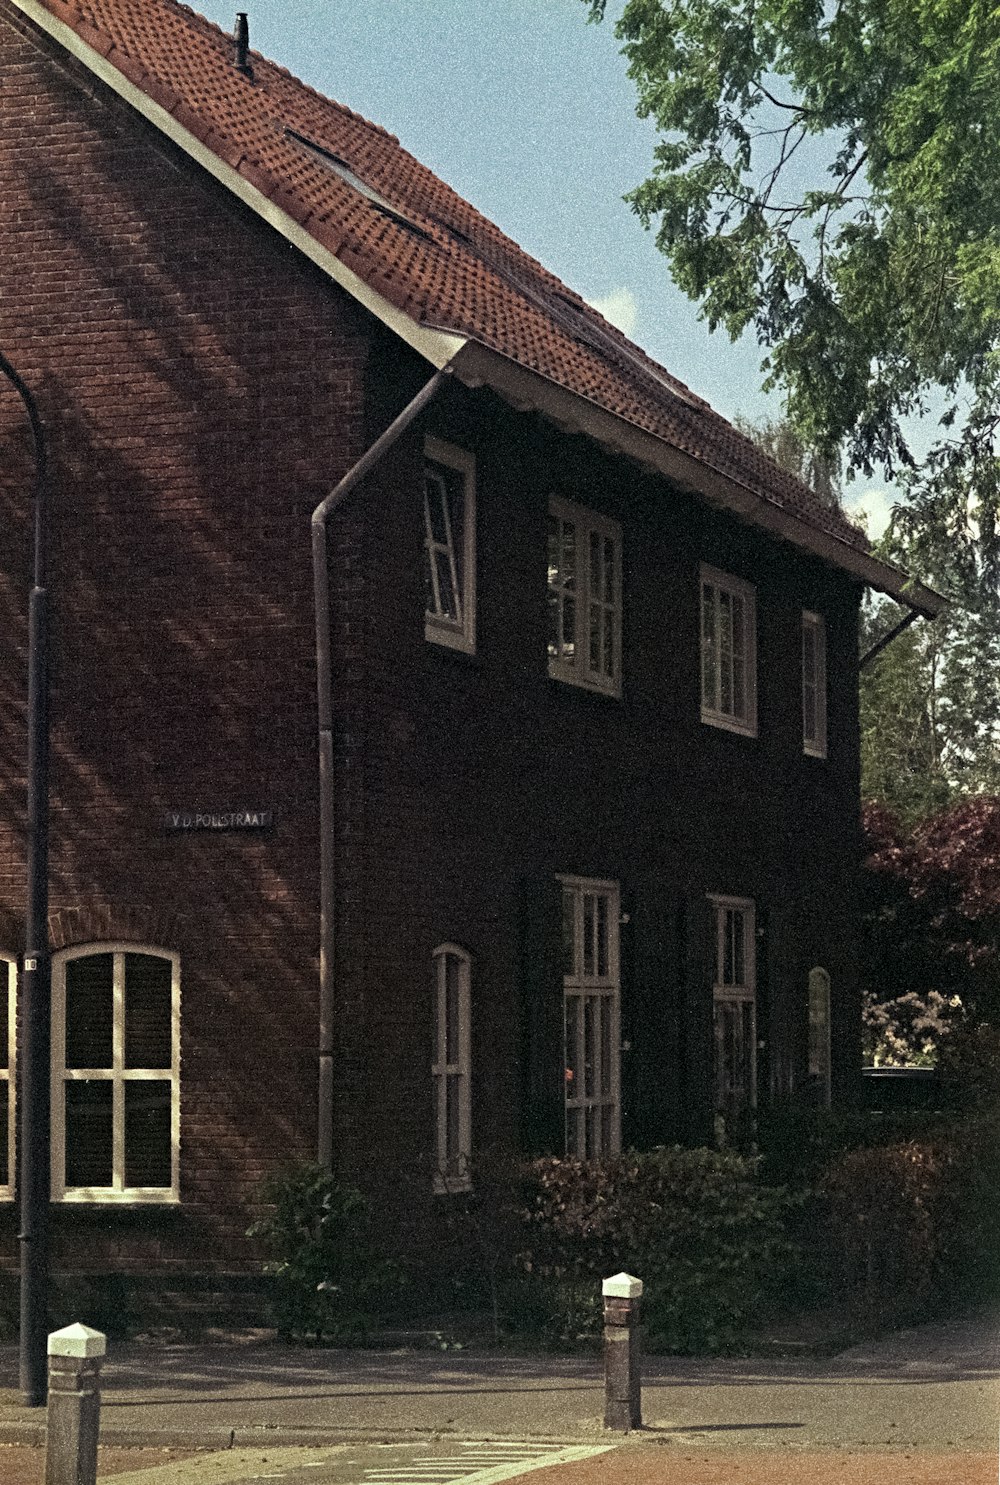 a red brick building with a clock on the front of it